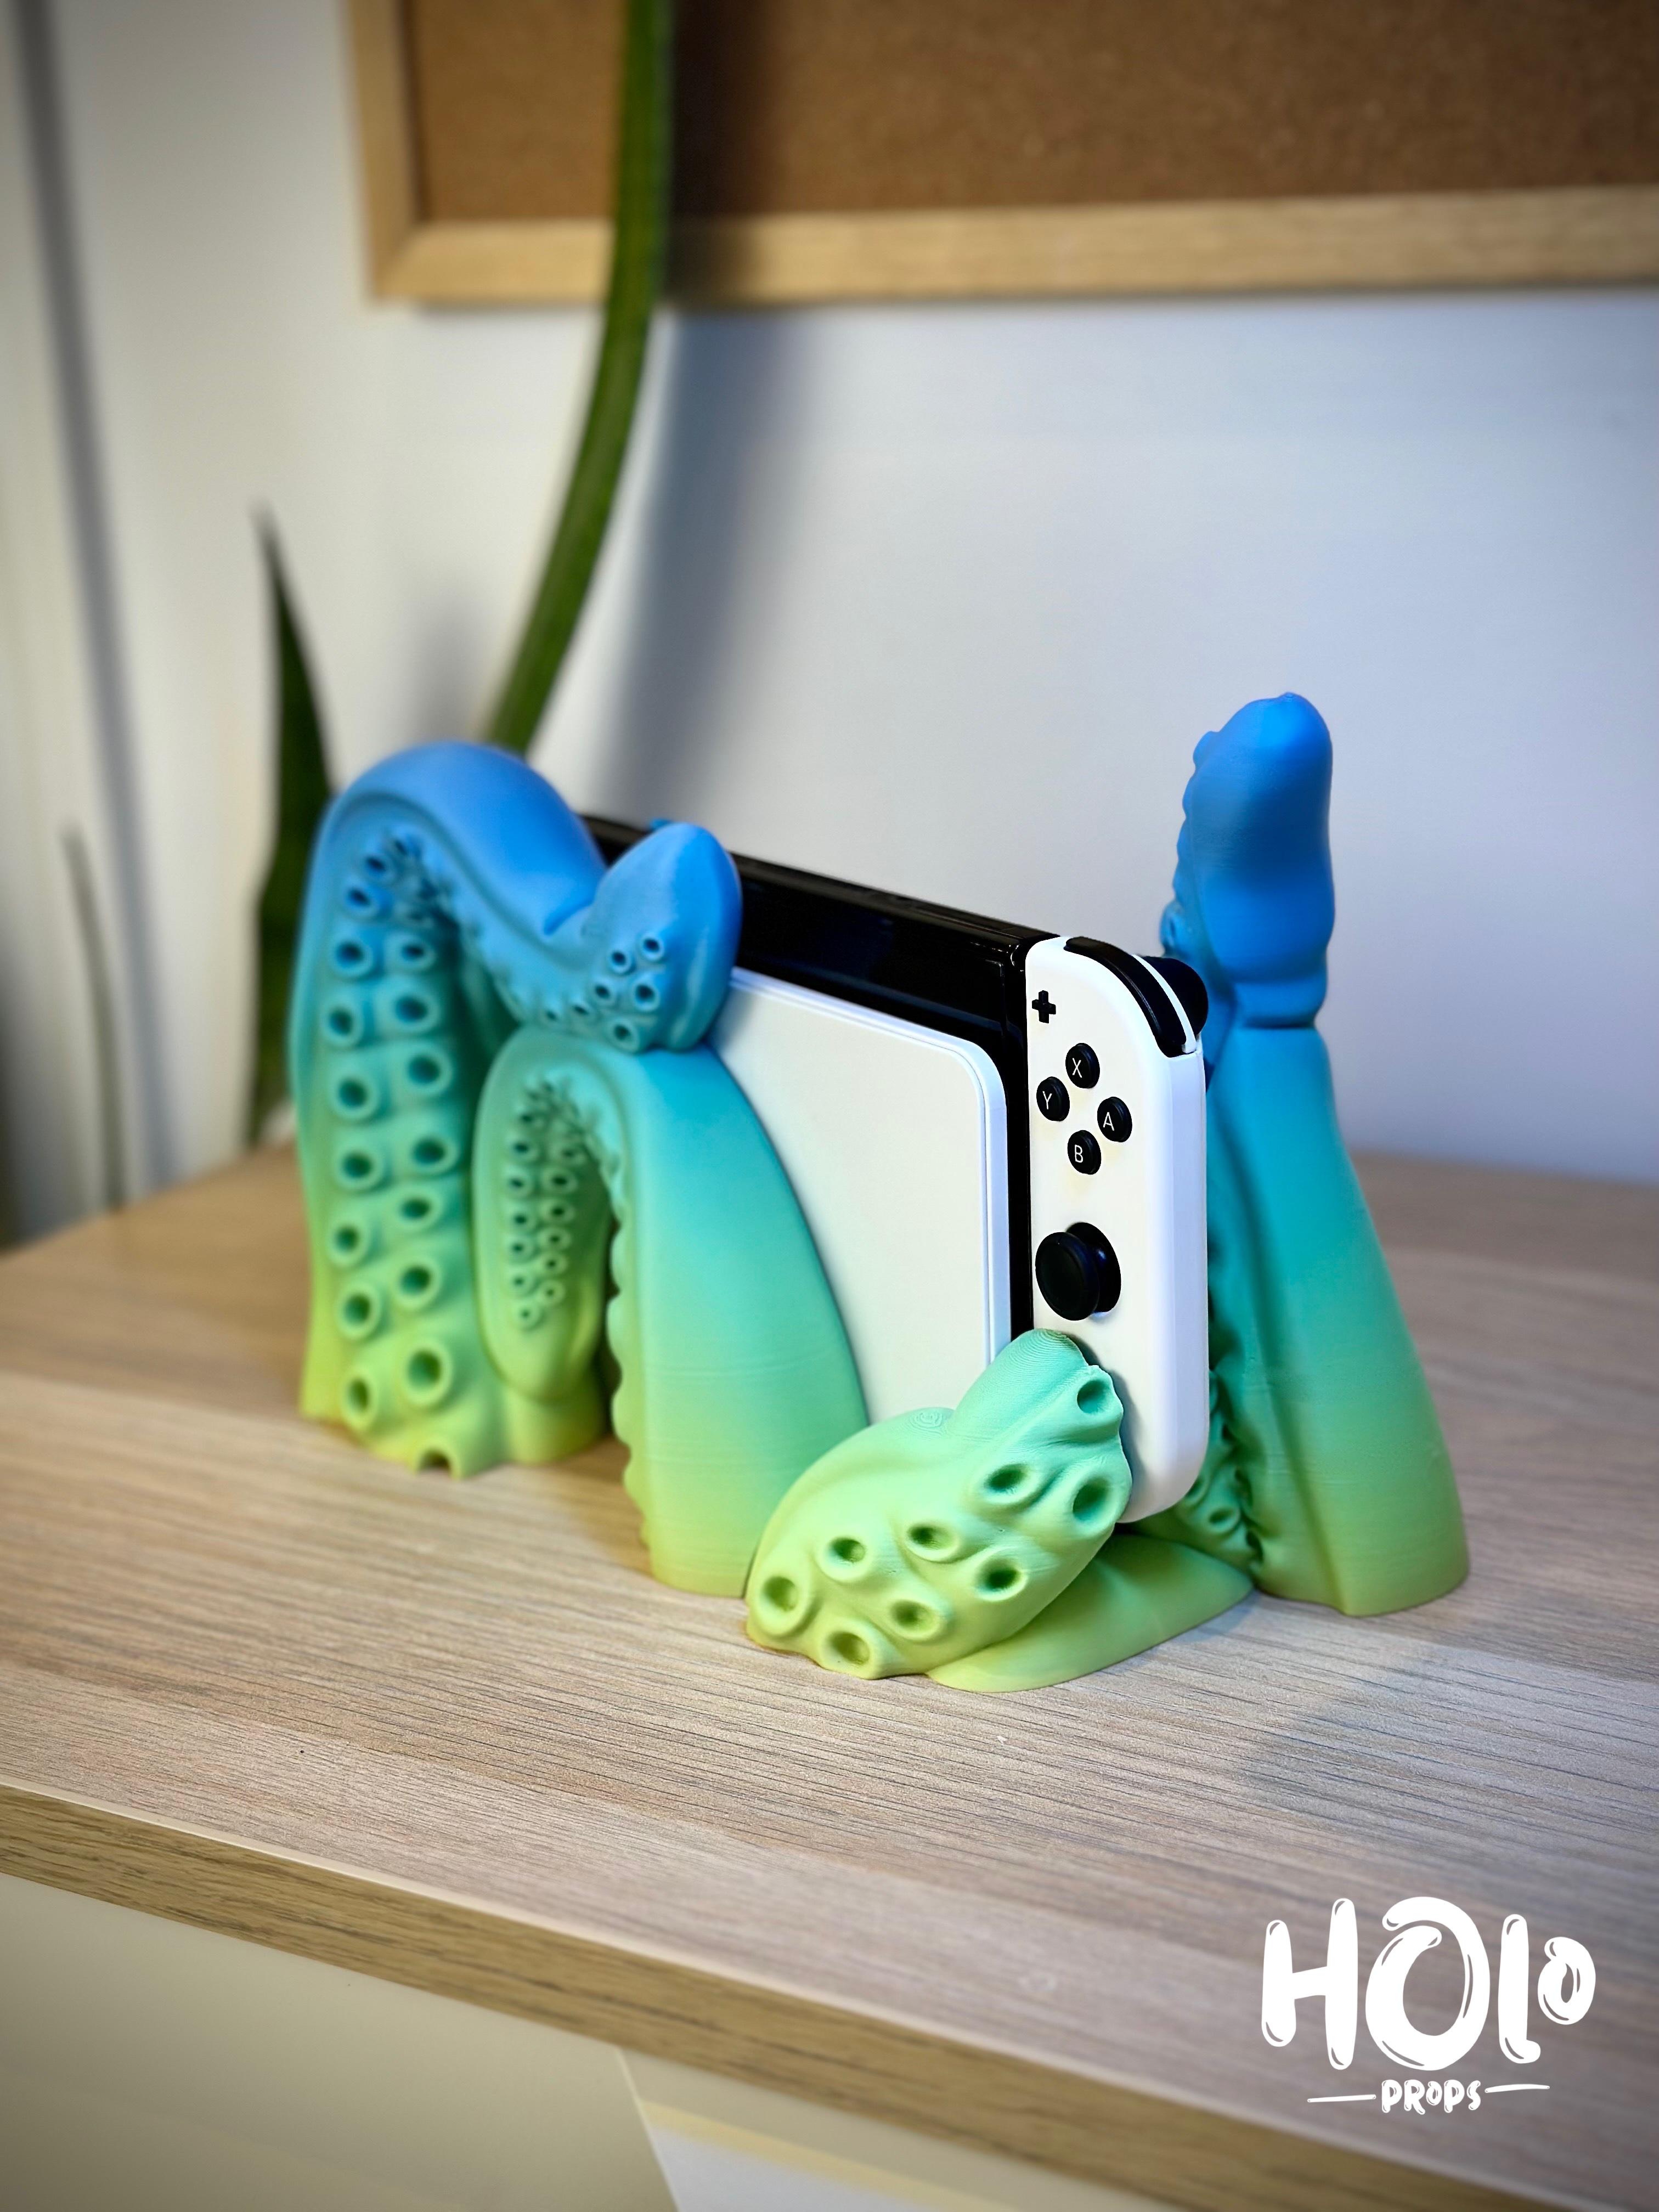 Nintendo Switch Tentacle Dock - Classic & OLED version 3d model